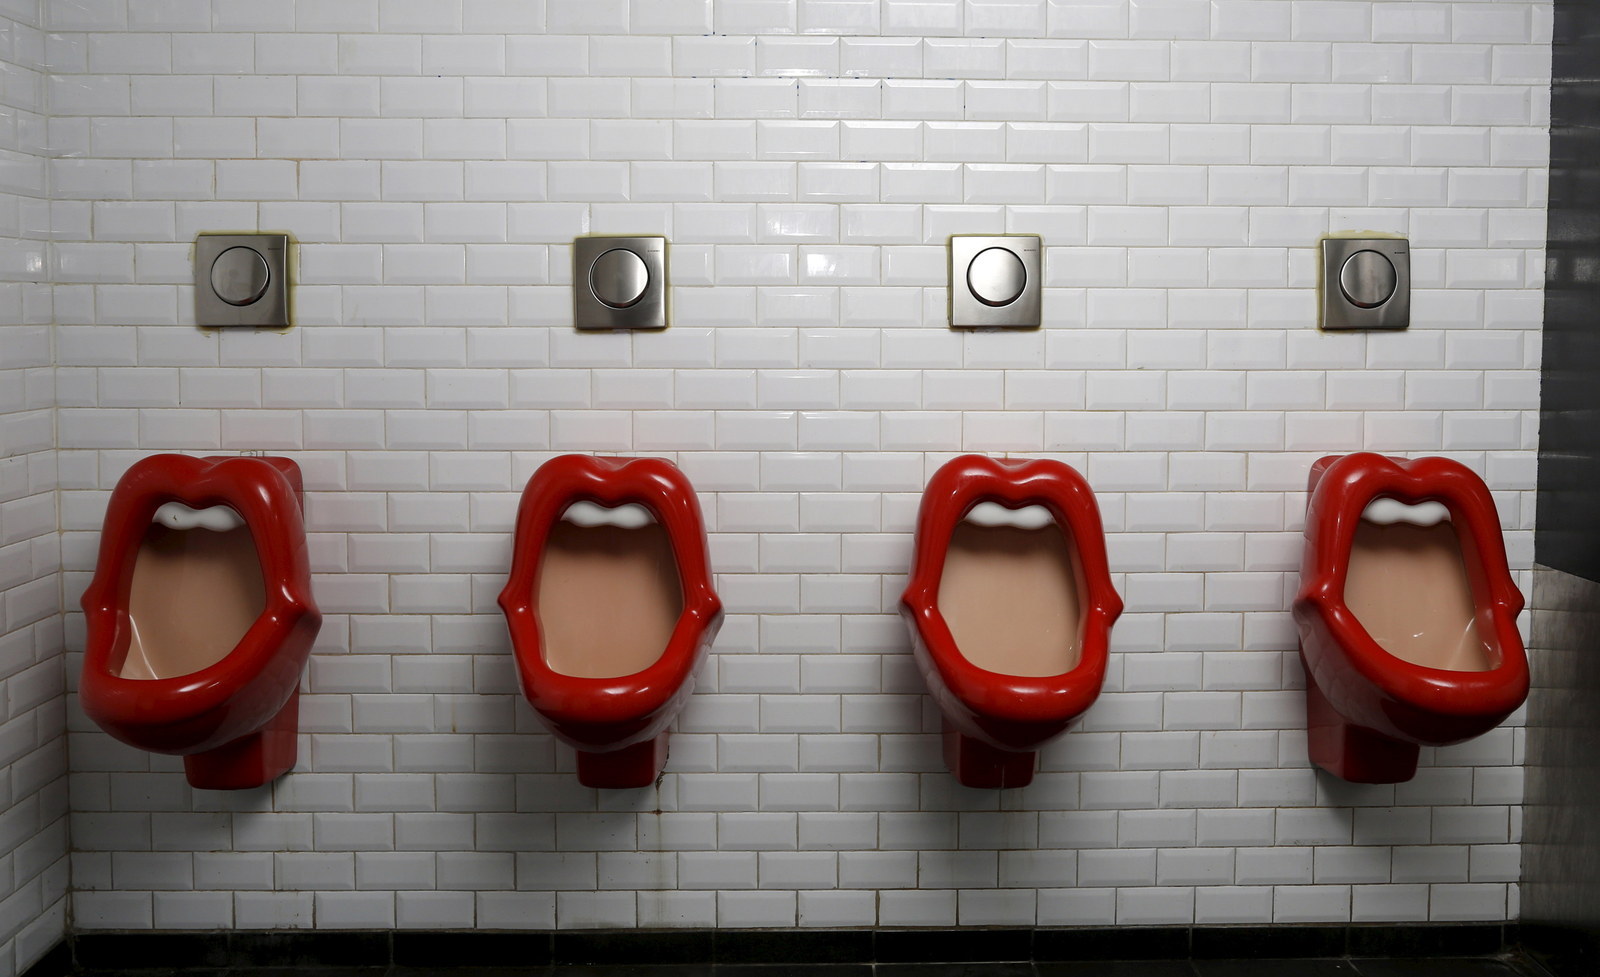 Urinals inspired by the Rolling Stones lips and tongue logo are seen in a b...